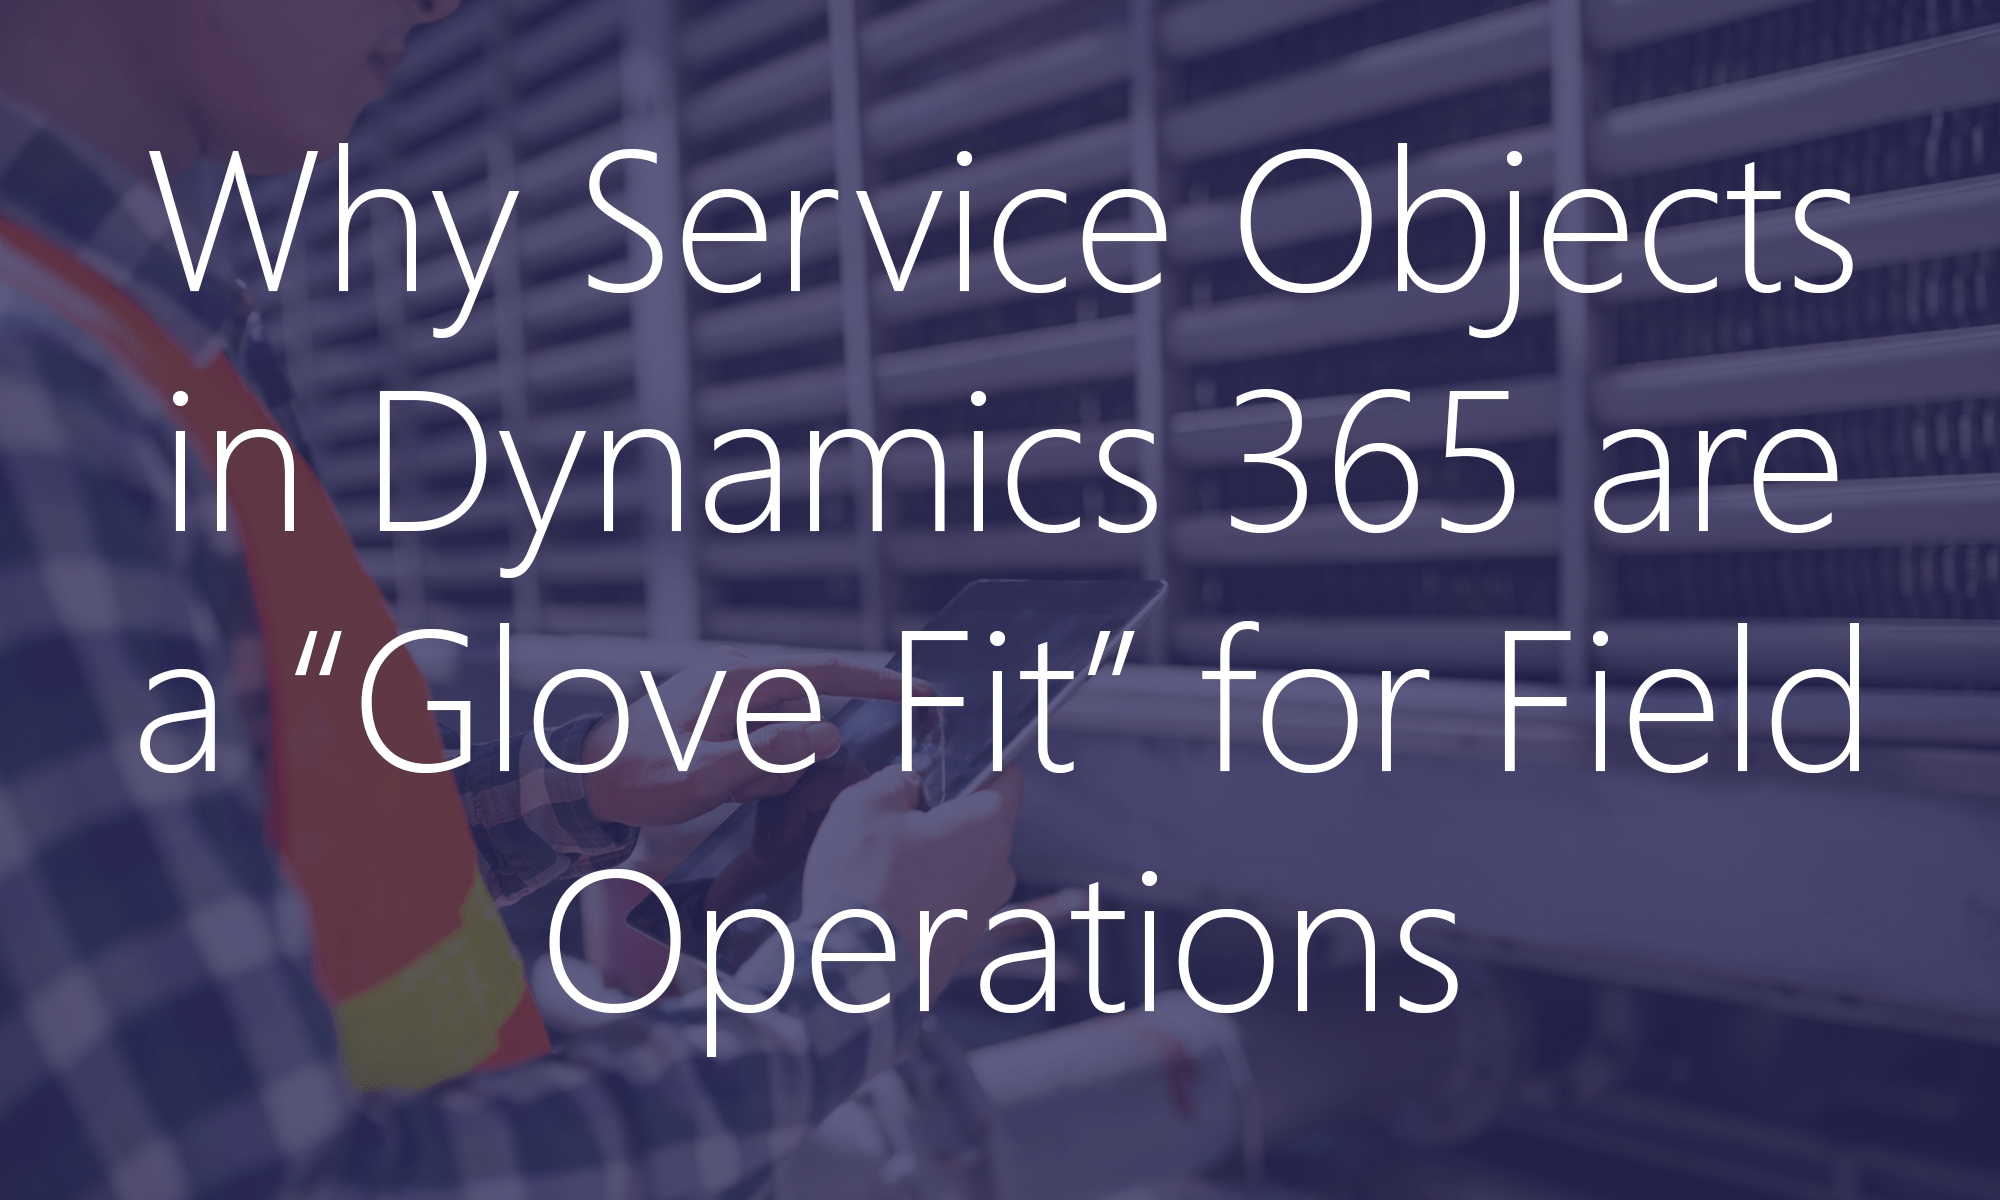 Service Objects in Dynamics 365 are a Glove Fit for Field Operations